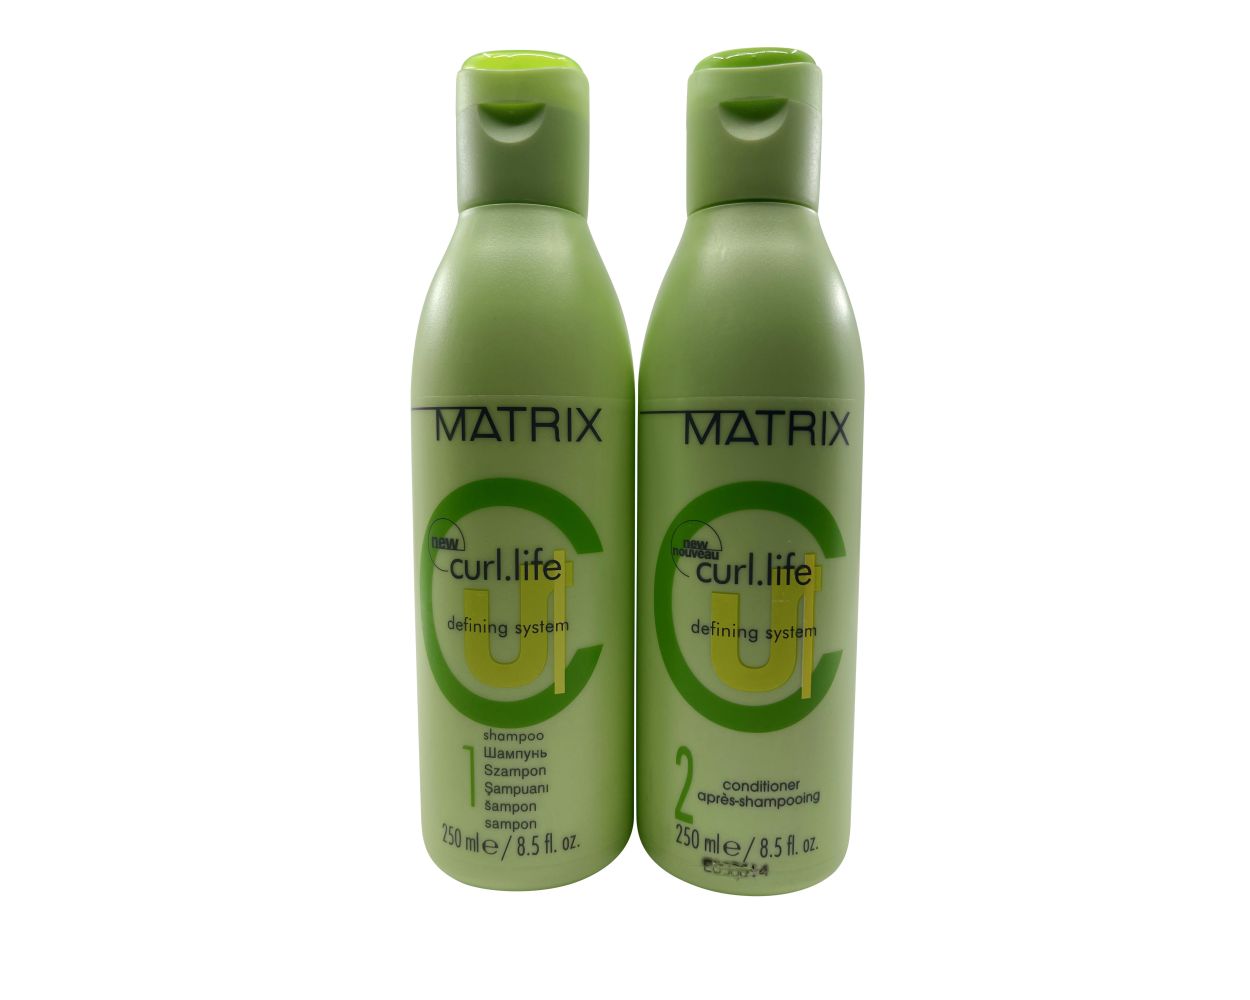 Mexico besværlige Retfærdighed Matrix Curl Life Defining System Shampoo & Conditioner Set Curly & Wavy Hair  | Shampoo - Beautyvice.com